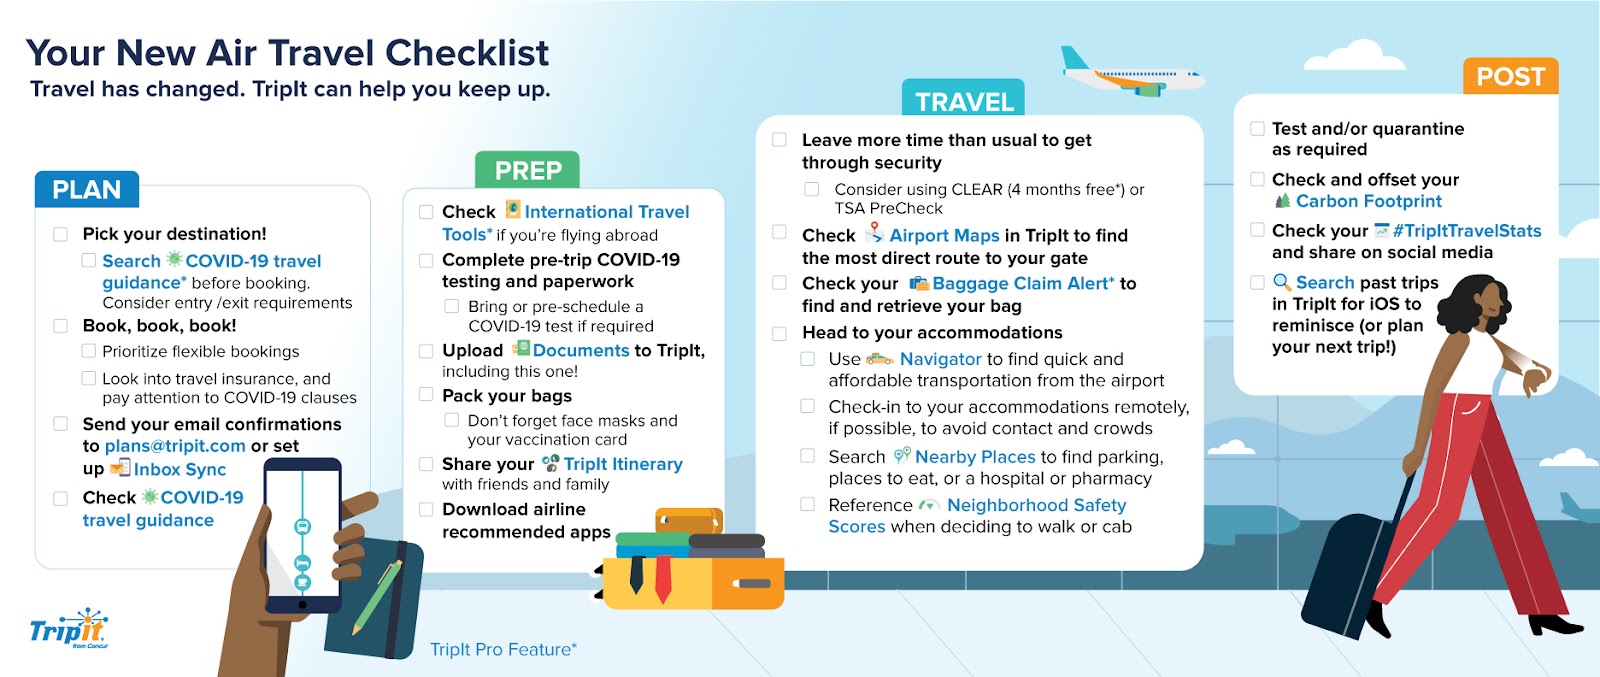 Your New Air Travel Checklist — TripIt Blog